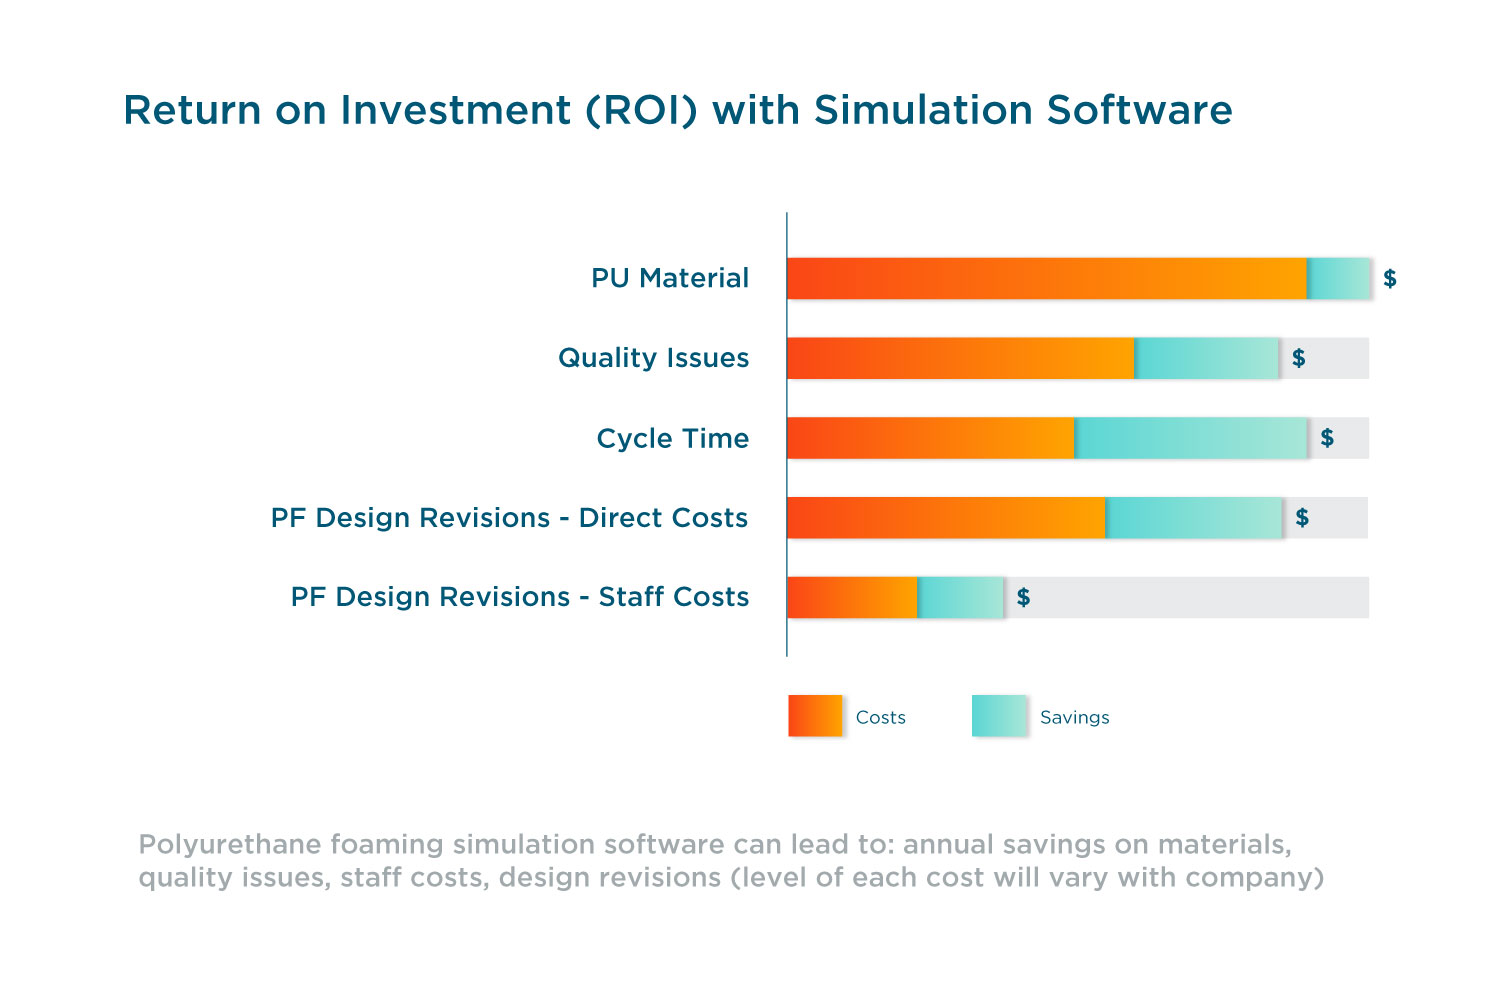 Return on investment with simulation software